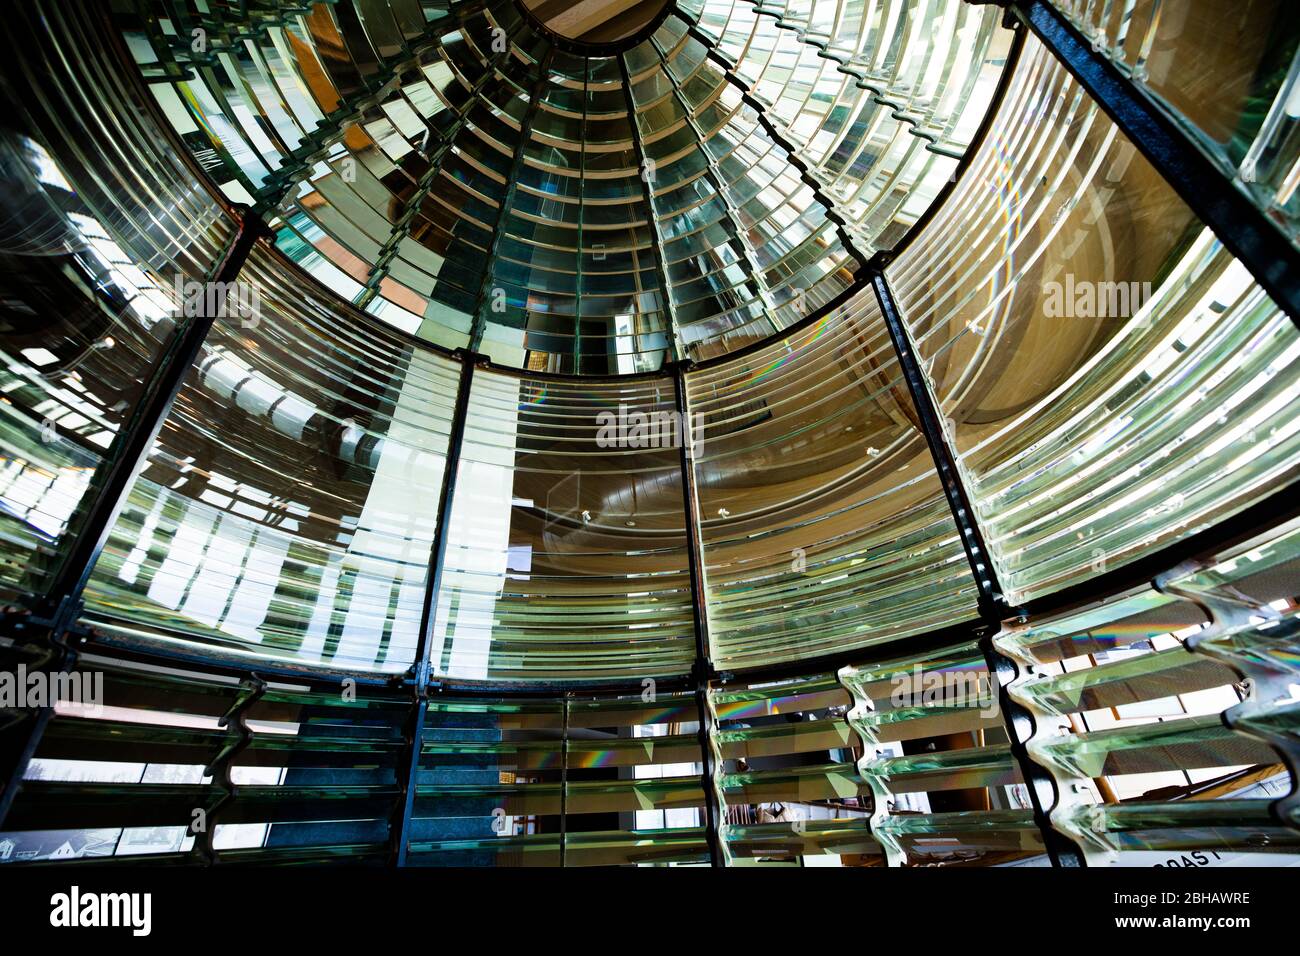 Lighthouse Lens interior Lewis and Clark interpretive Center, Cape Disappointment State Park, Washington, USA Stock Photo